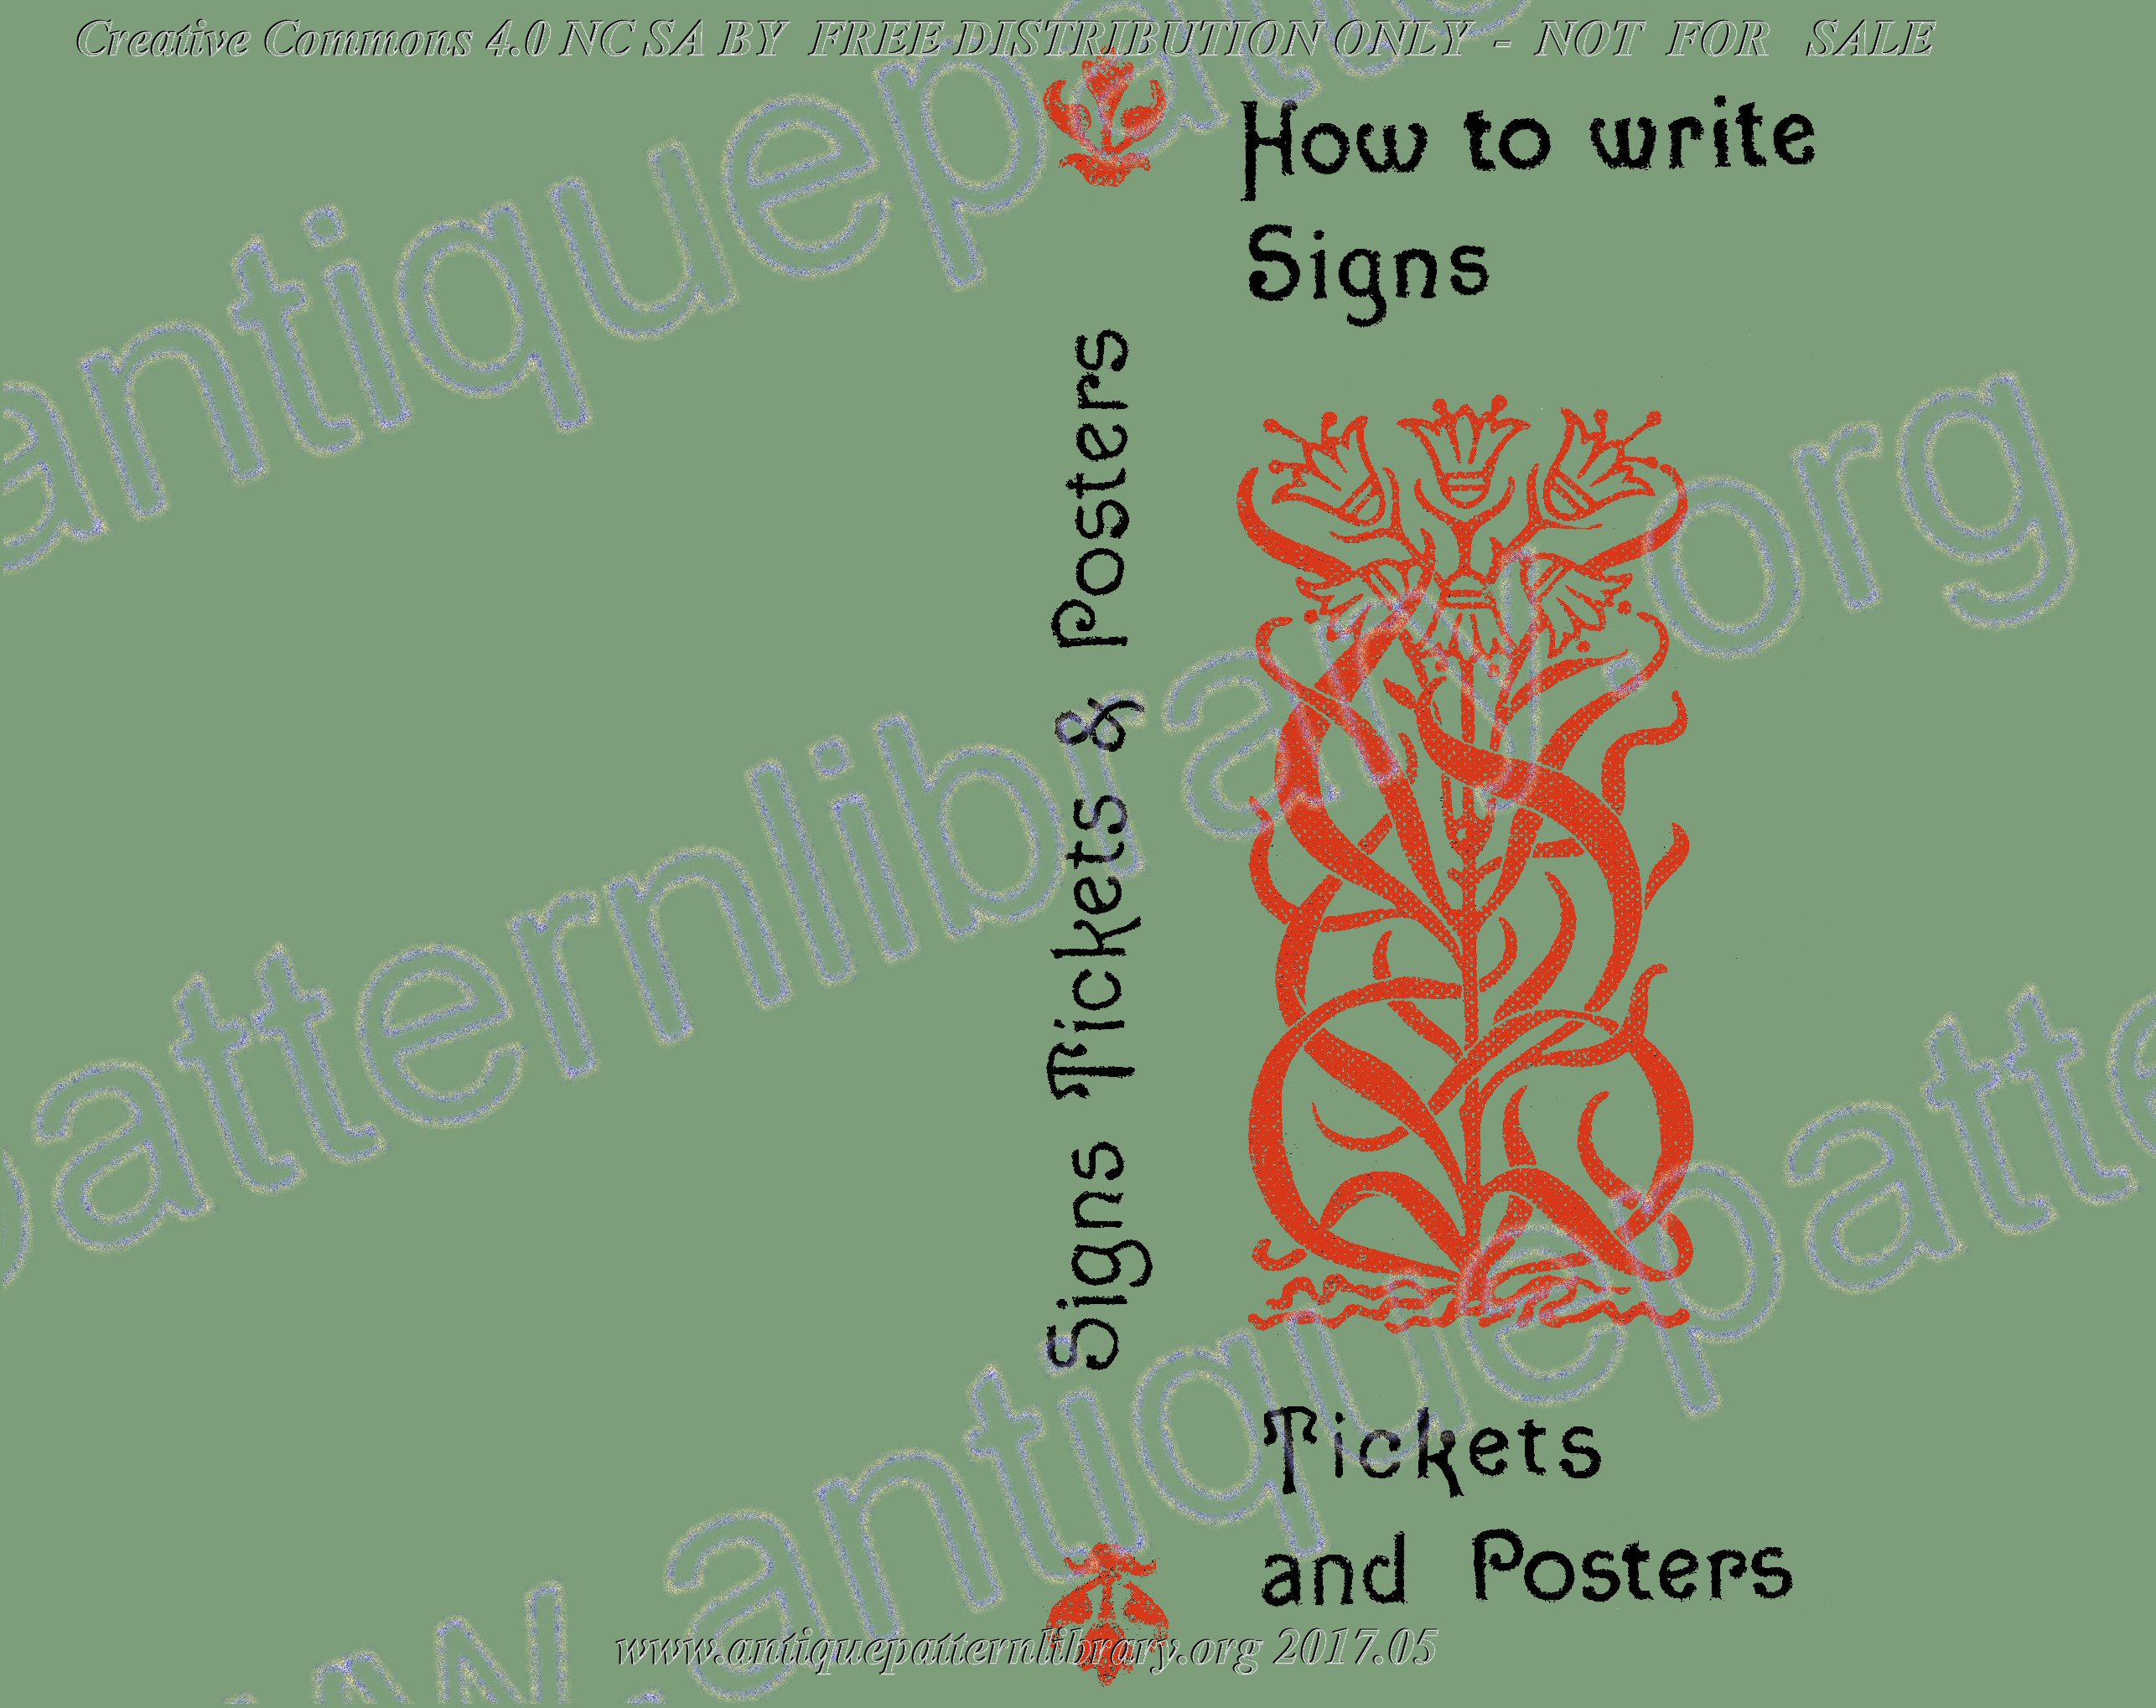 B-SW041 How to Write Signs, Tickets, and Posters